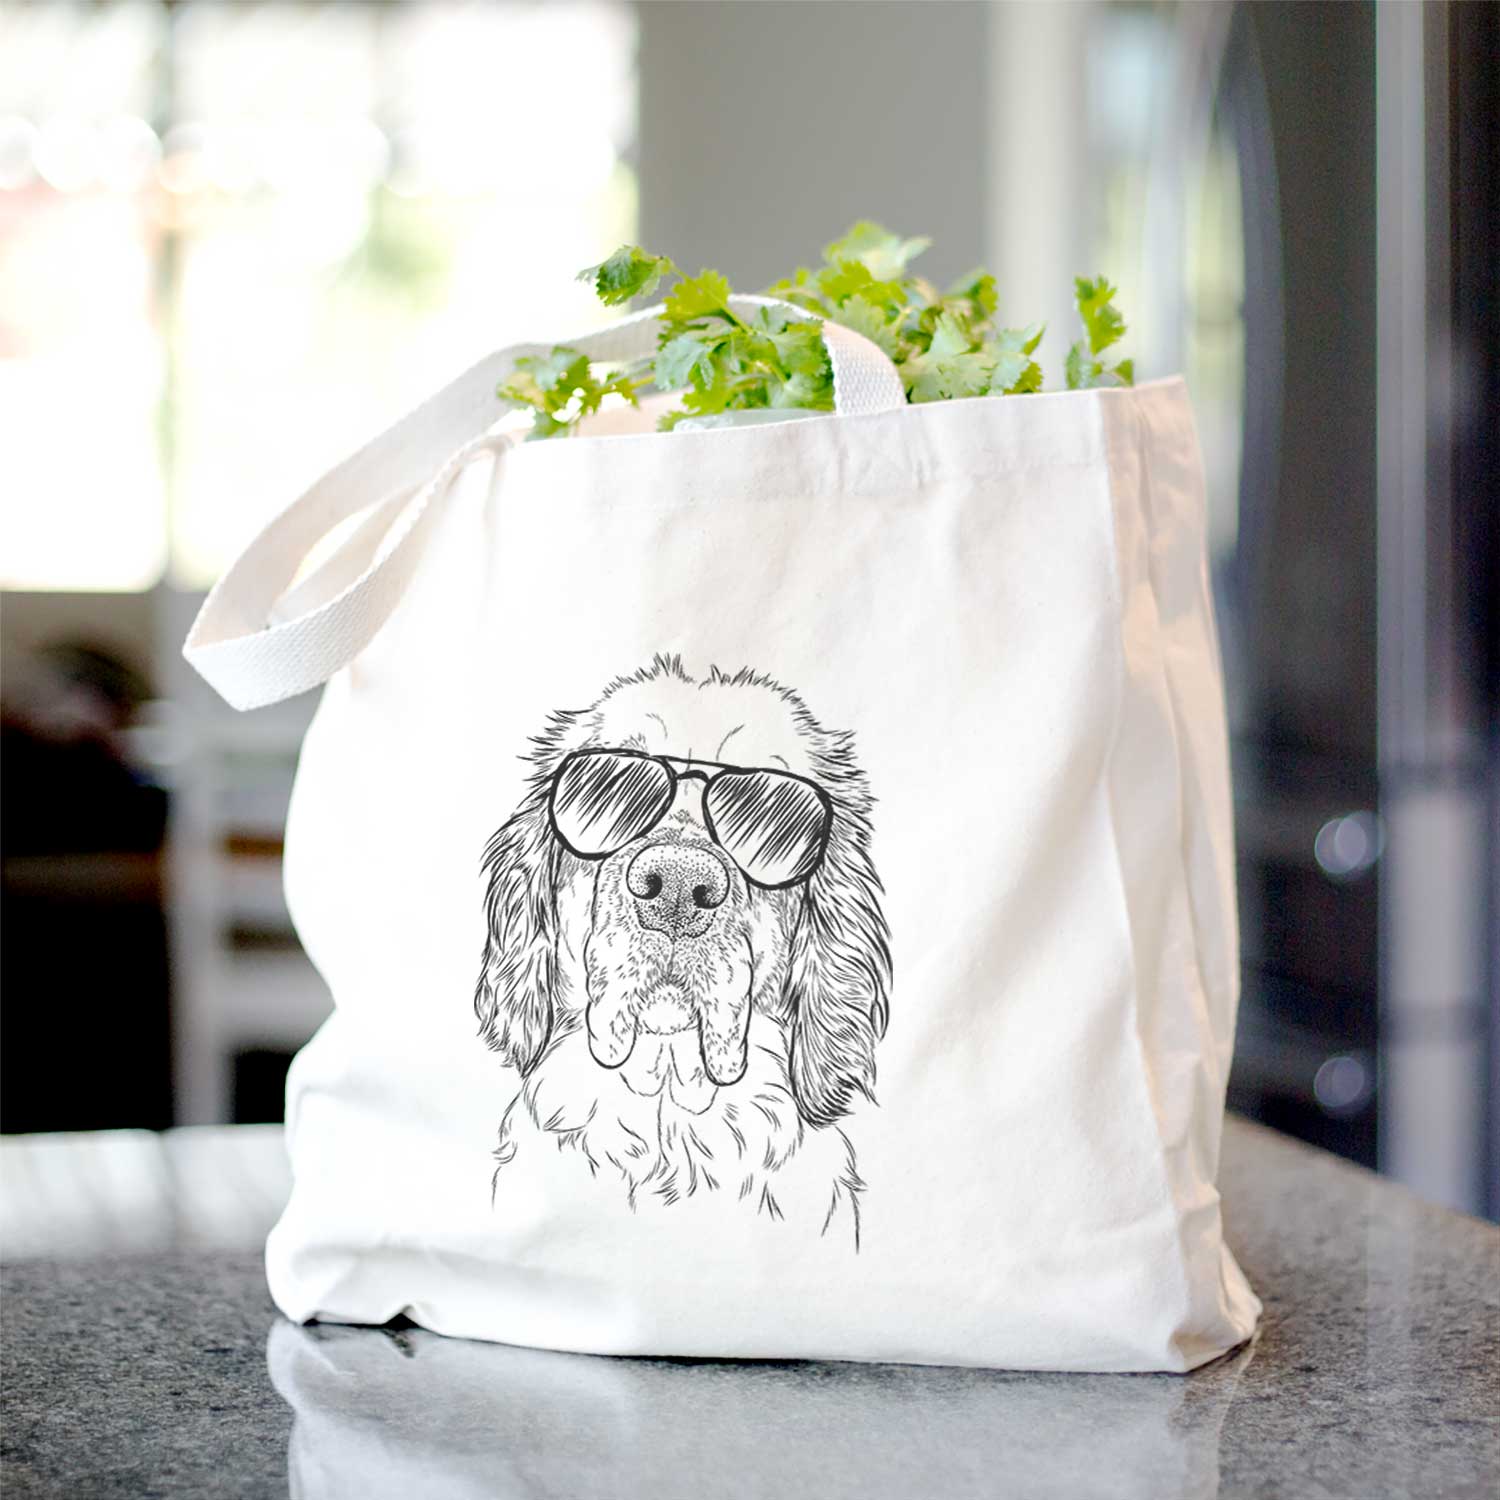 Sully the Clumber Spaniel - Tote Bag